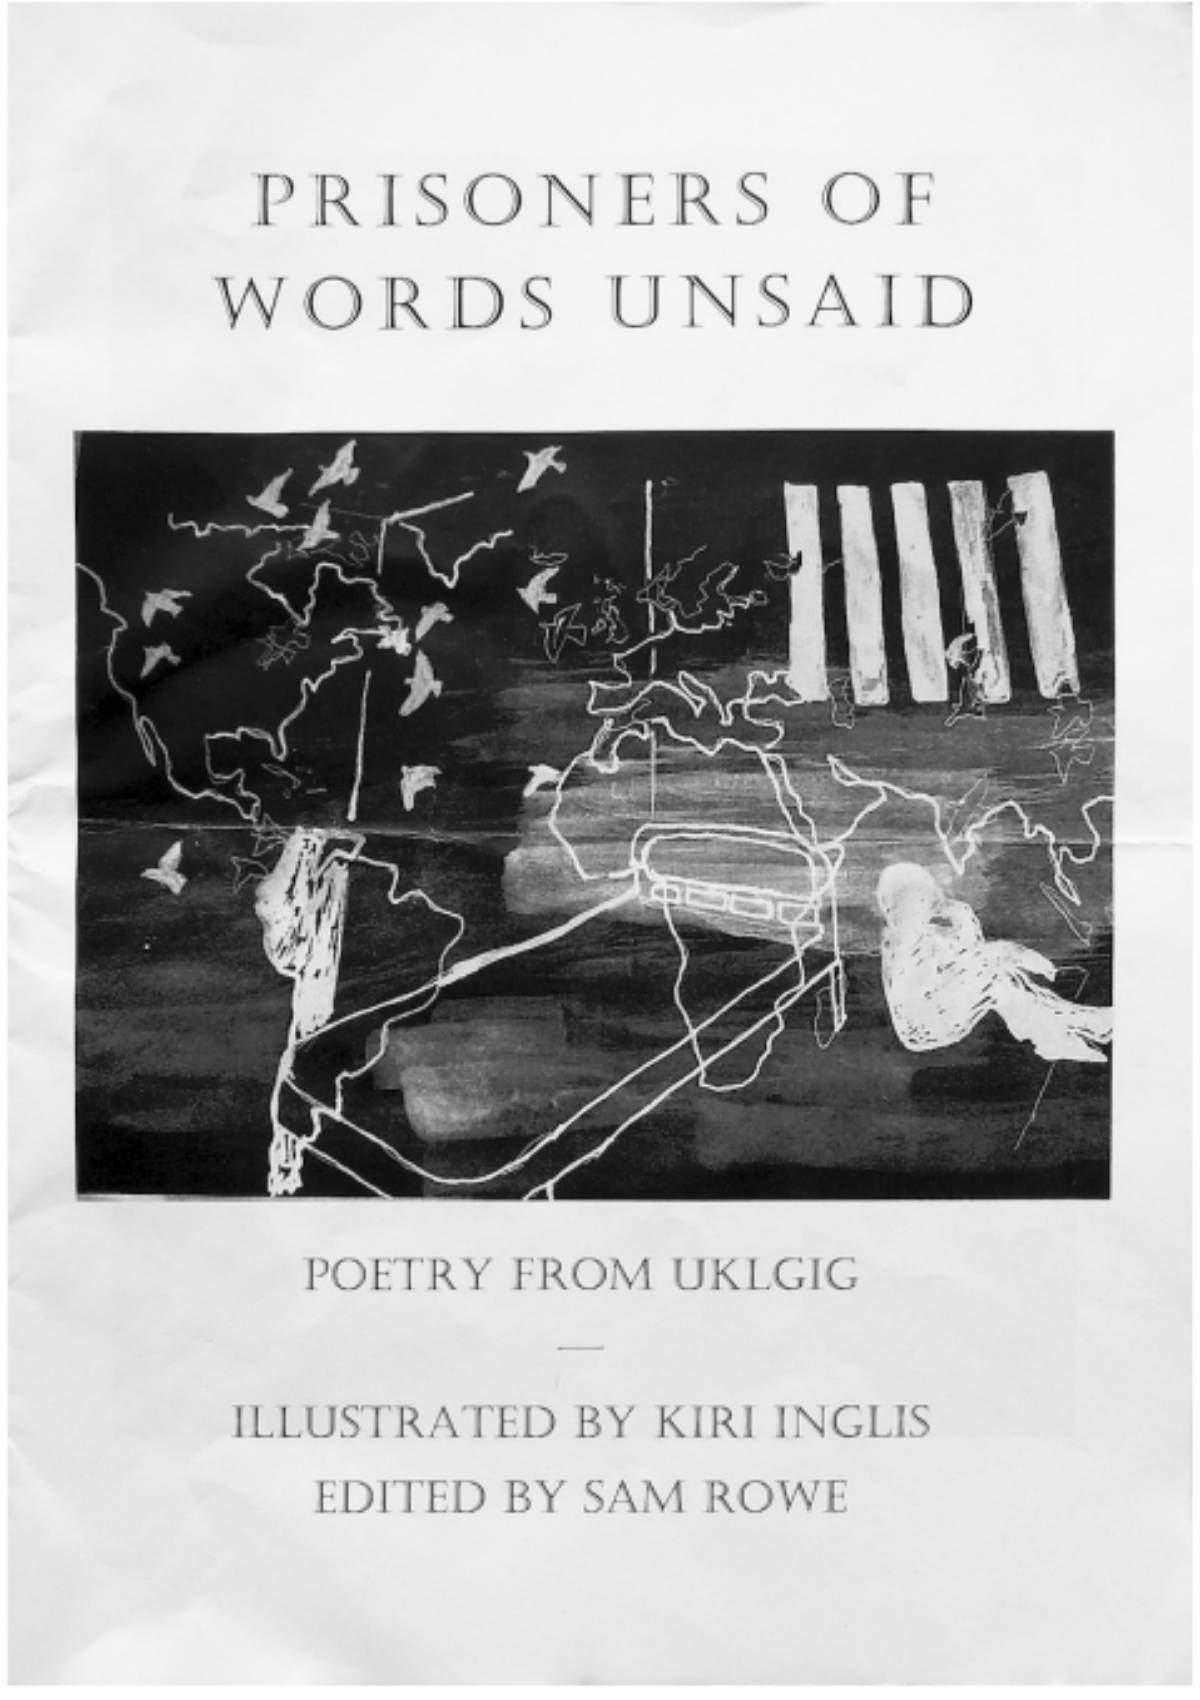 Prisoners of words unsaid poetry from magic.